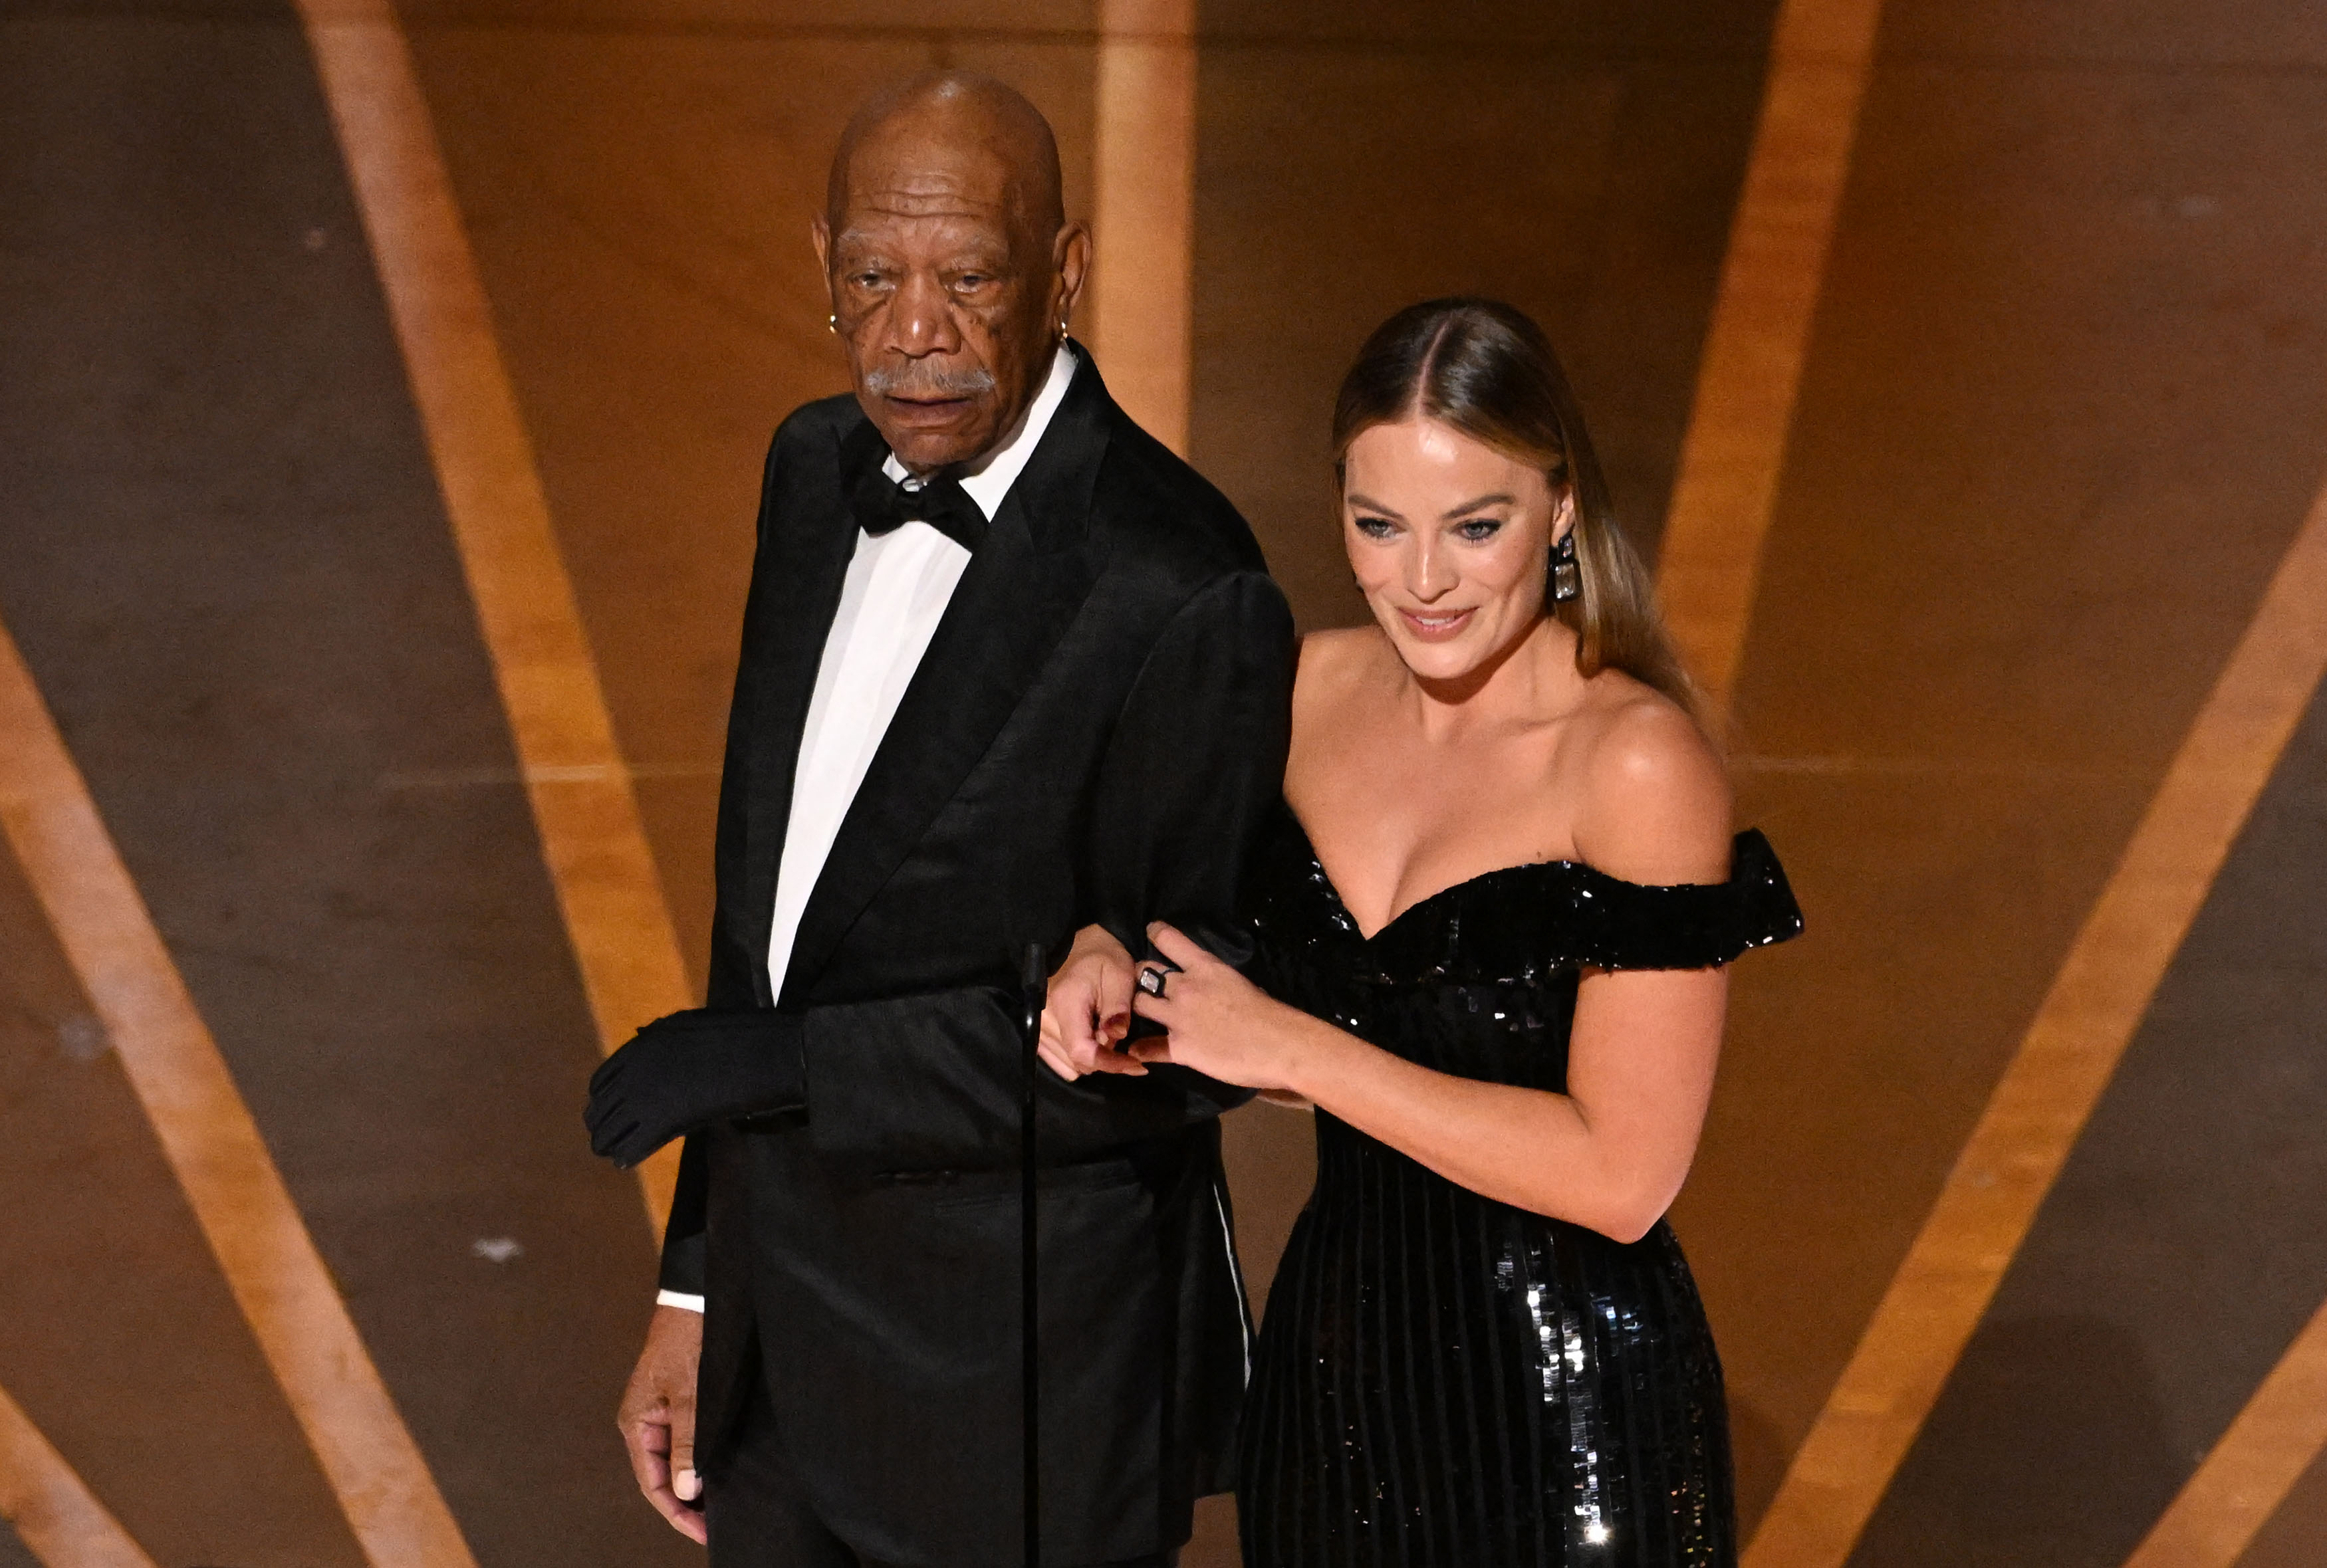 Morgan Freeman and Margot Robbie at the 95th Annual Academy Awards in March 2023 | Source: Getty Images